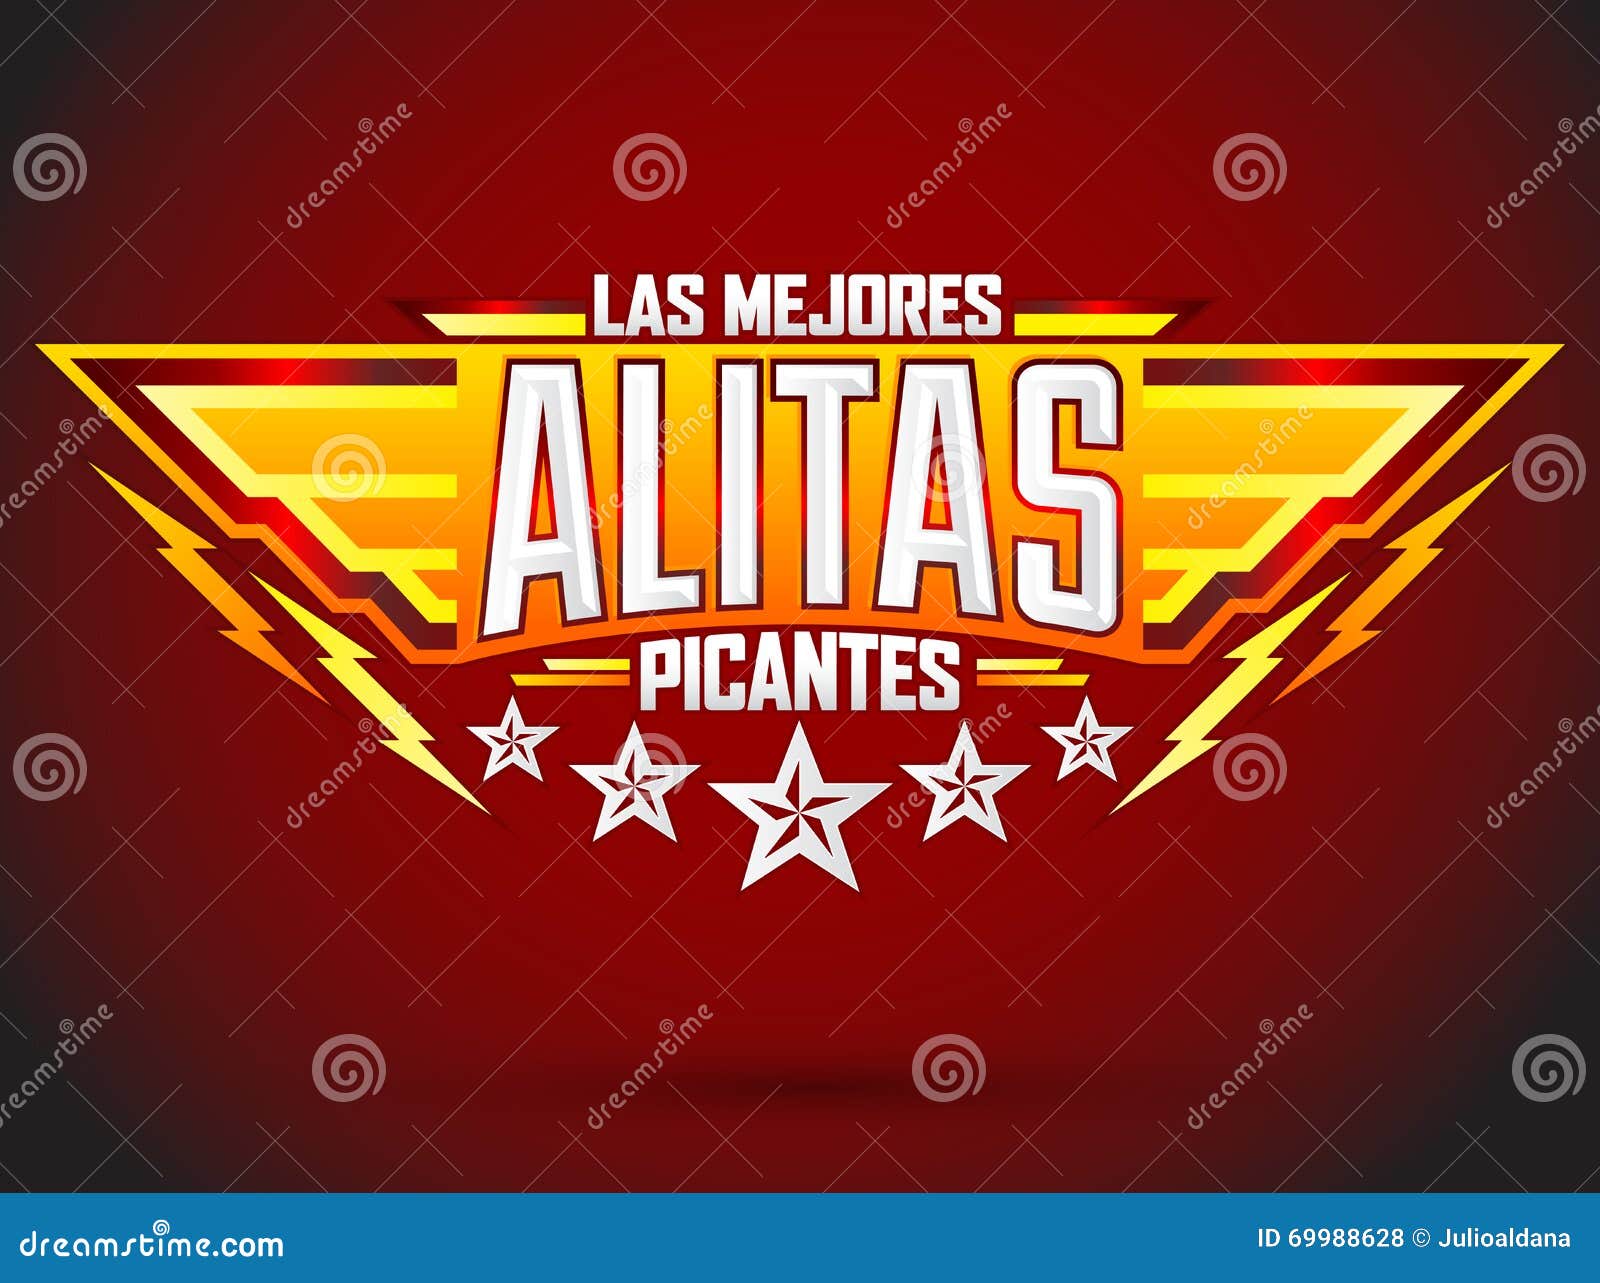 alitas picantes las mejores - the best hot chicken wings spanish text